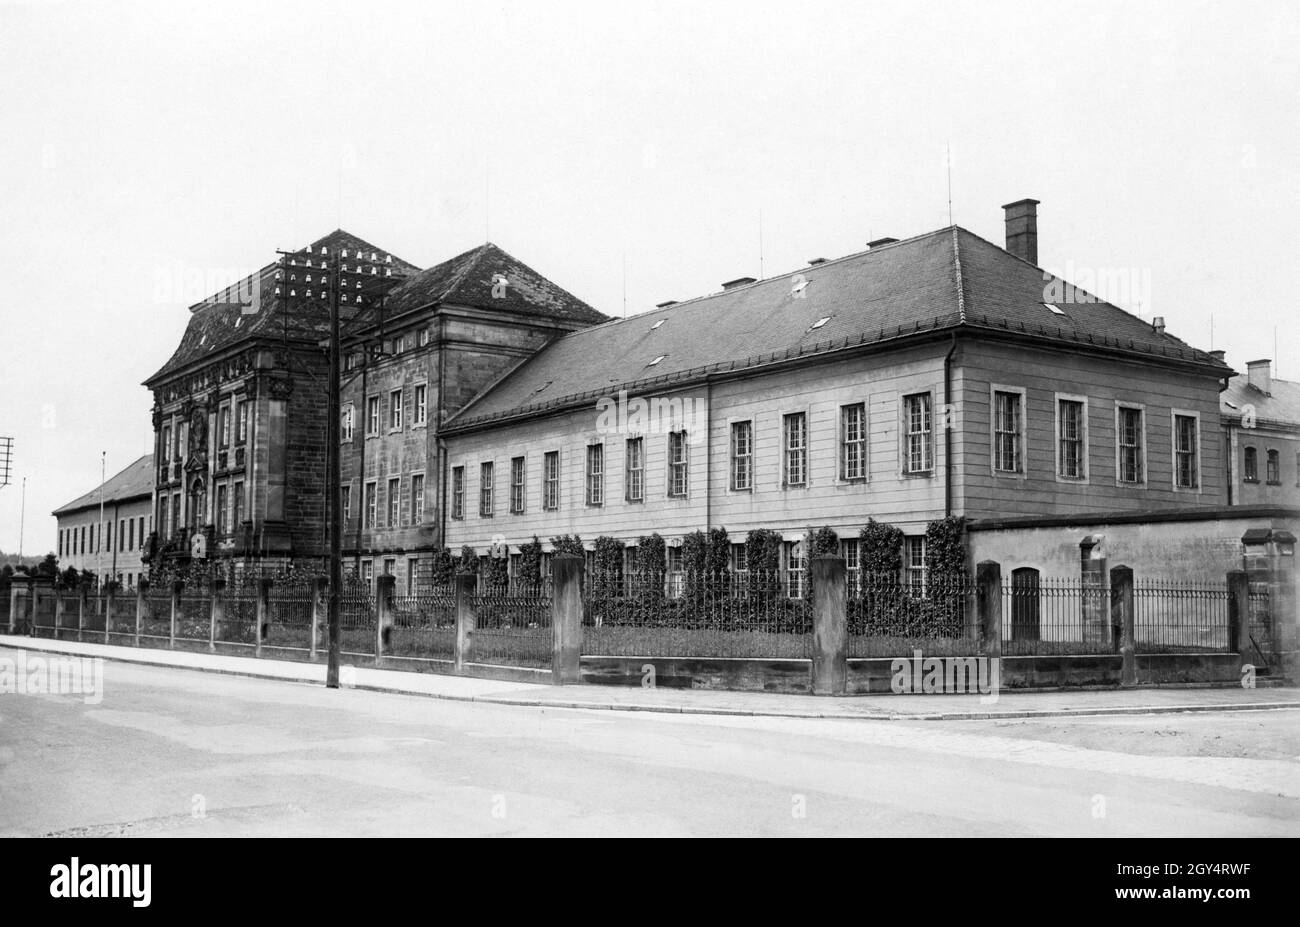 'The photograph from 1930 shows the St. Georgen prison (then euphemistically called ''workhouse'') of Bayreuth. Part of the prison in Brendecker Straße can be seen, which consisted of the Order Castle St. Georgen including annexes. The Order Castle was the former chapter house of the Order of the Red Eagle [automated translation]' Stock Photo